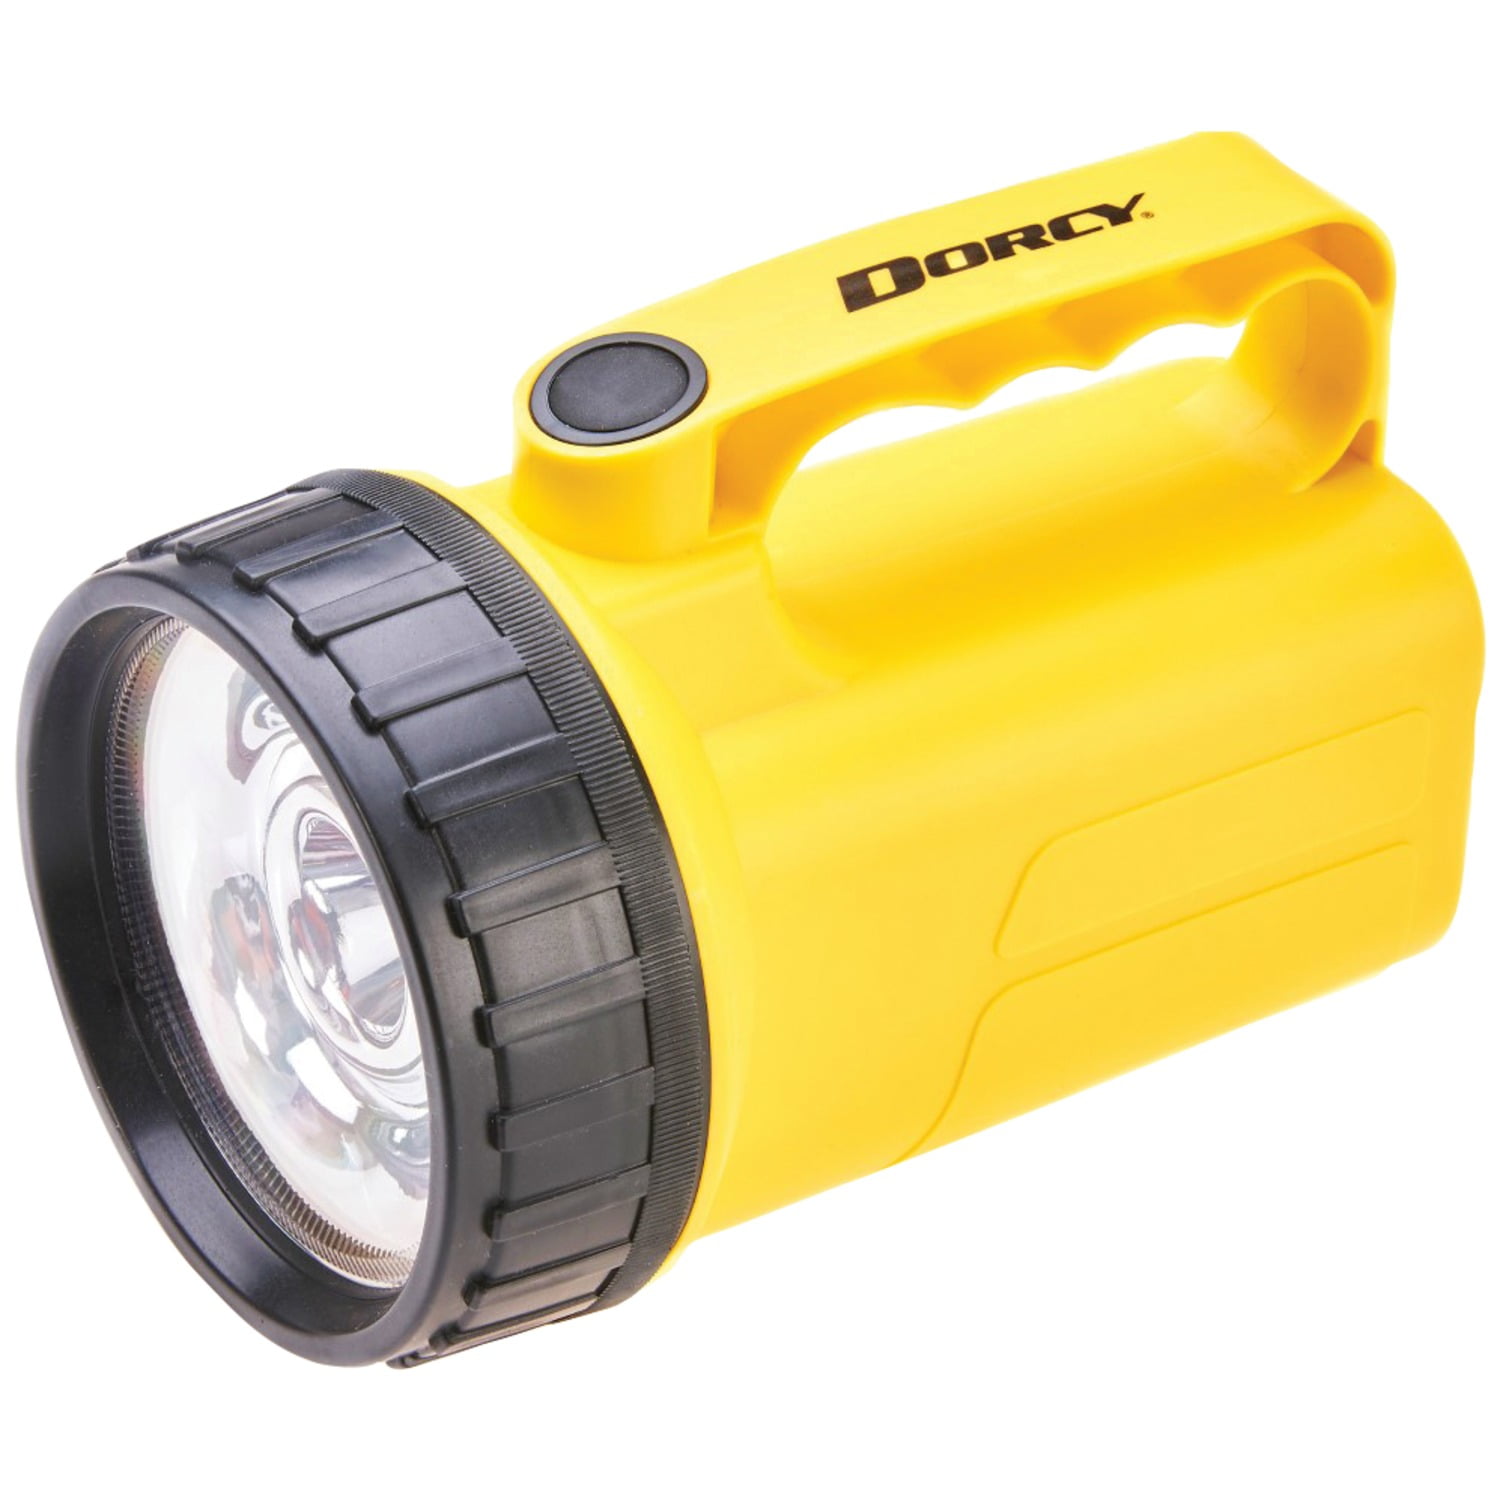 NEW Led Rechargeable Torch Spot lamp Lantern 37 Led's 50 to 100 Metre Full Beam 